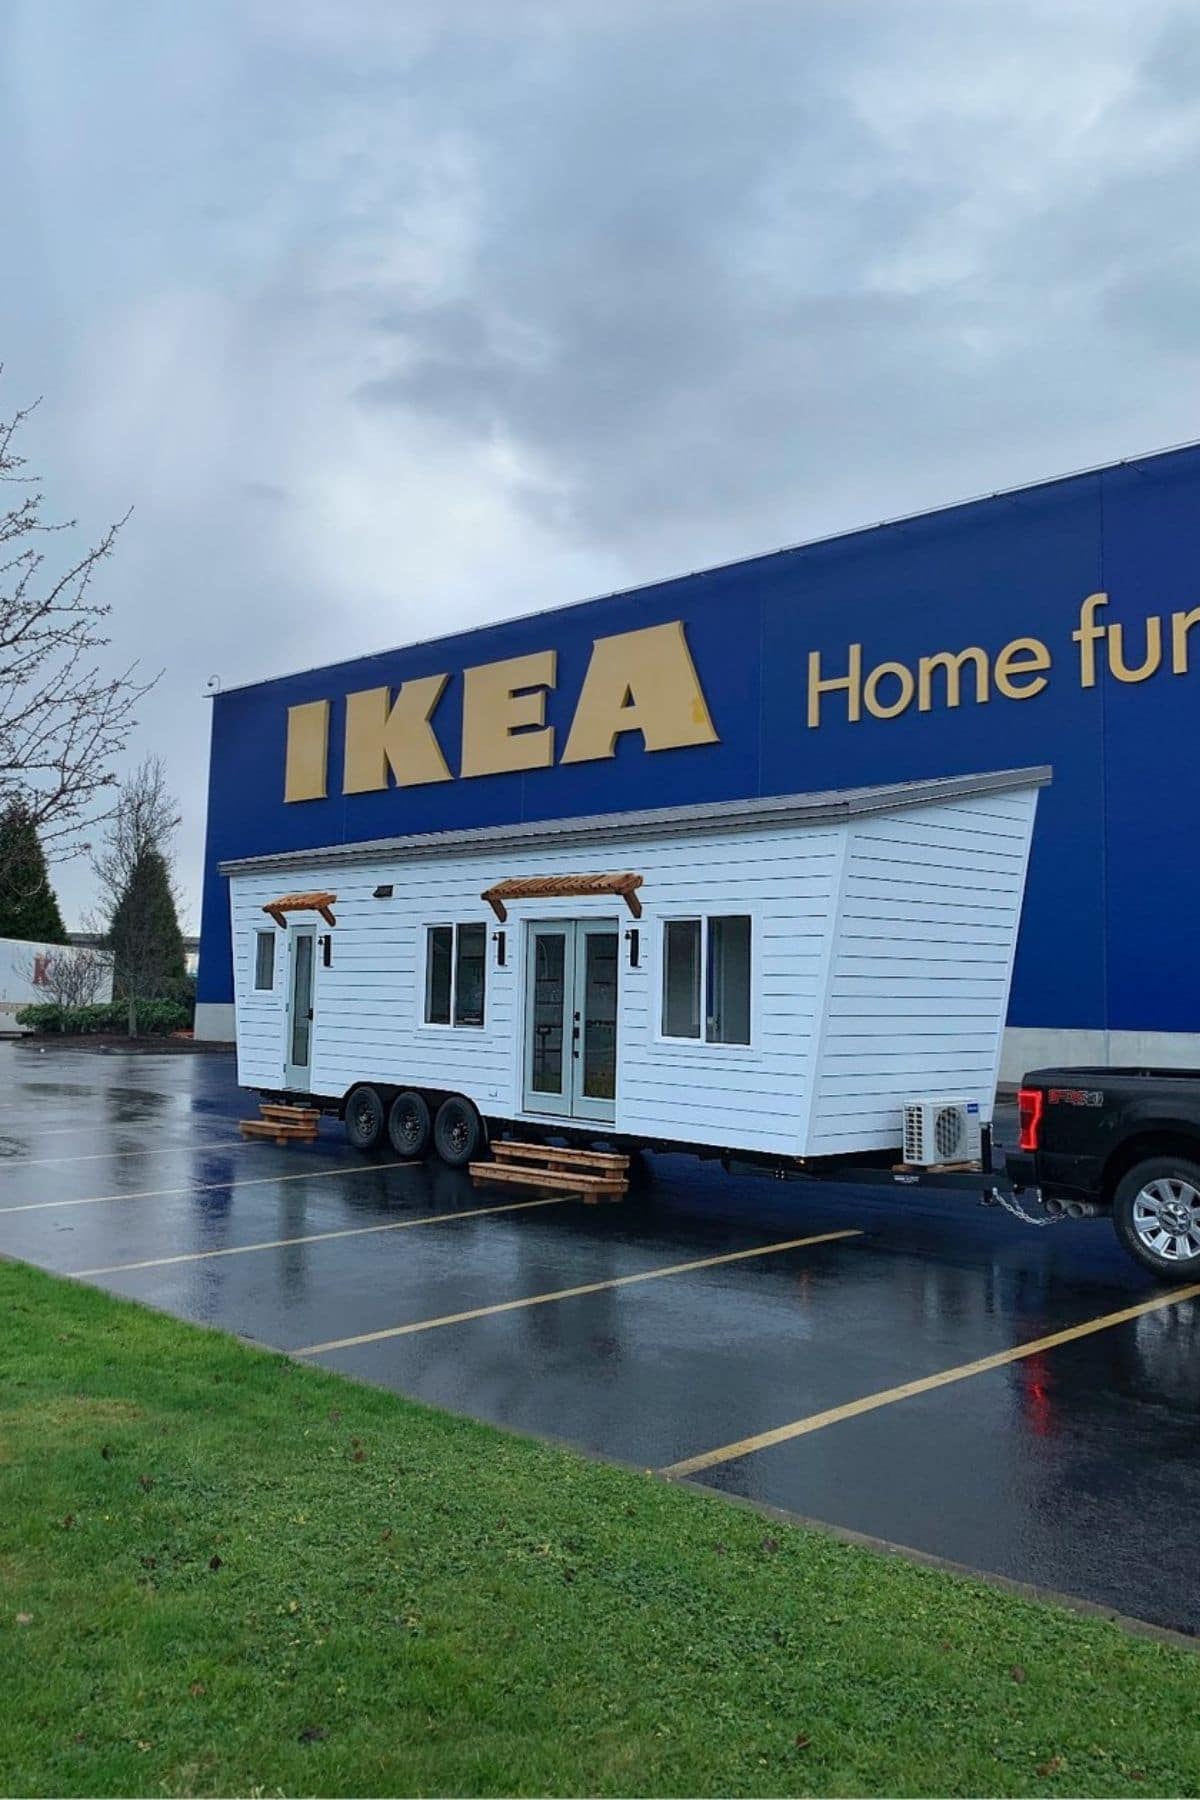 White tiny home with truck in Ikea parking lot